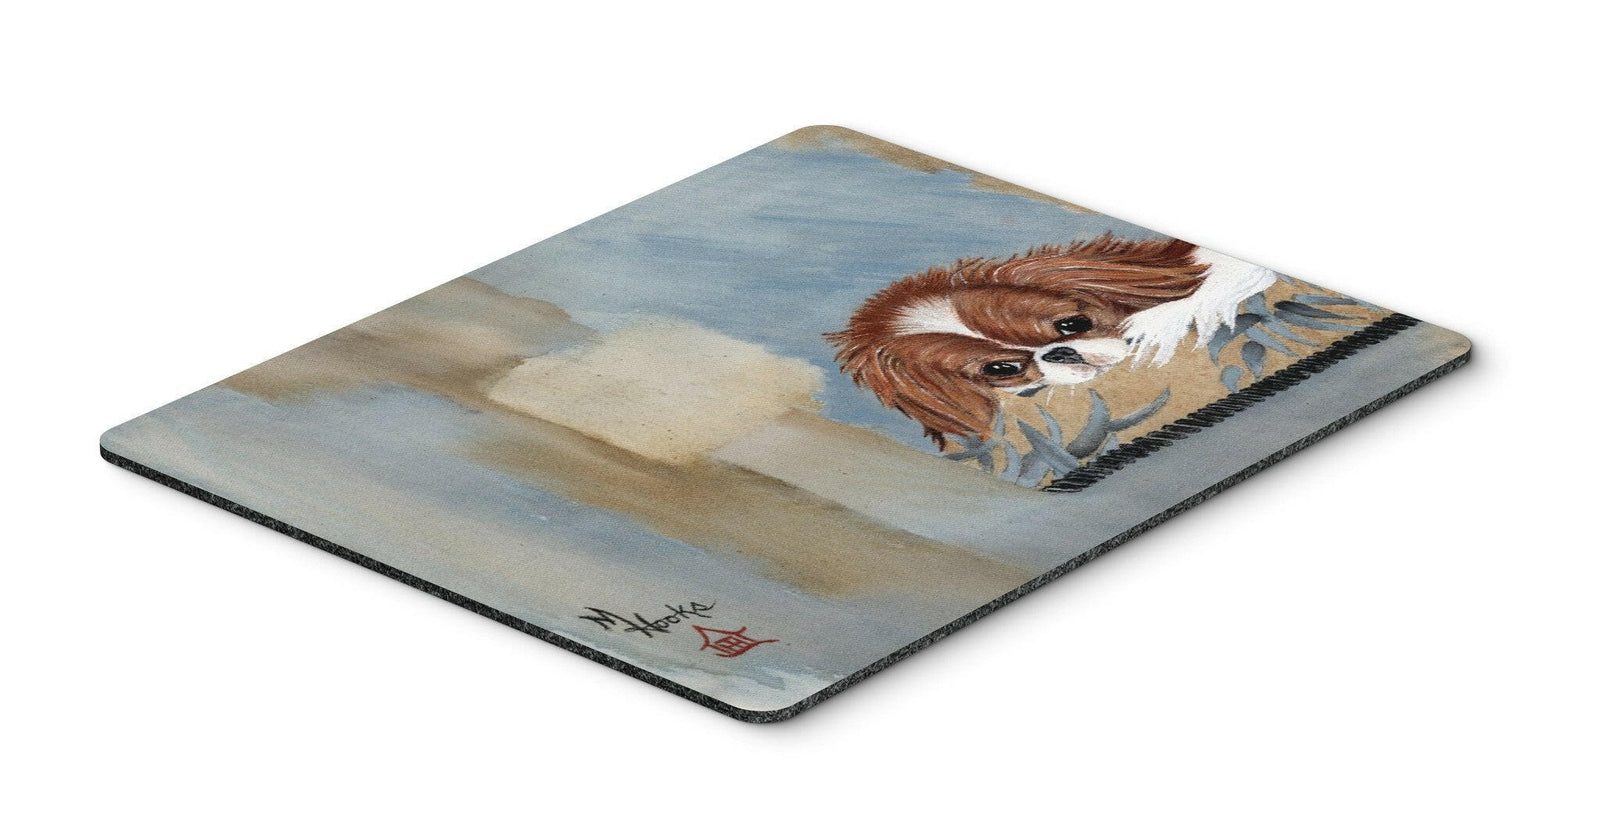 Japanese Chin Resting Mouse Pad, Hot Pad or Trivet MH1010MP by Caroline's Treasures